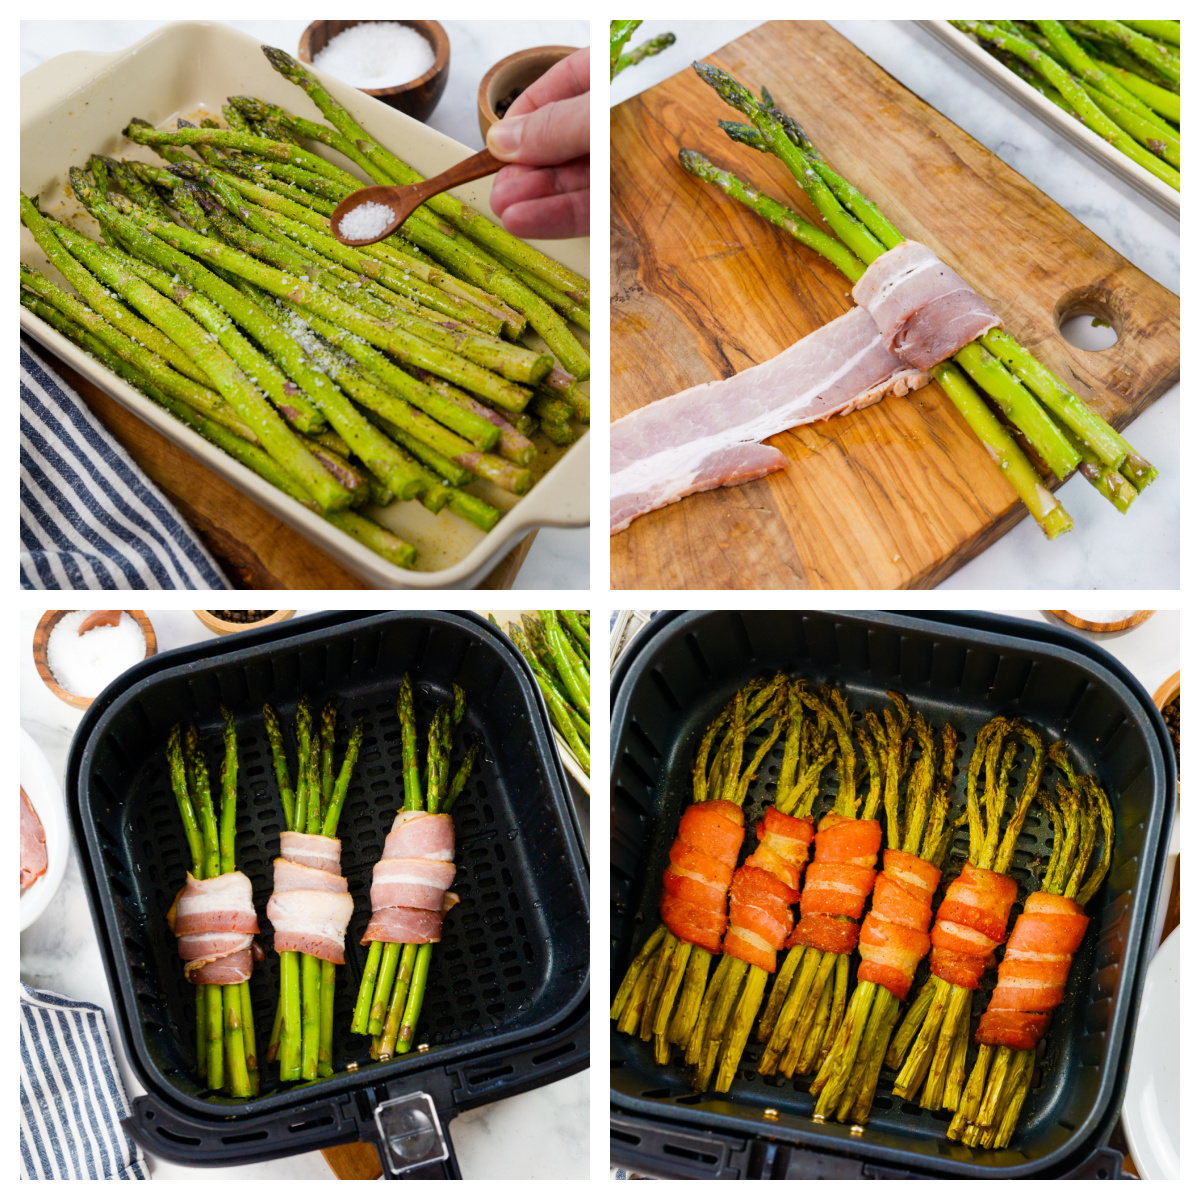 Collage of the steps of wrapping bacon around asparagus.